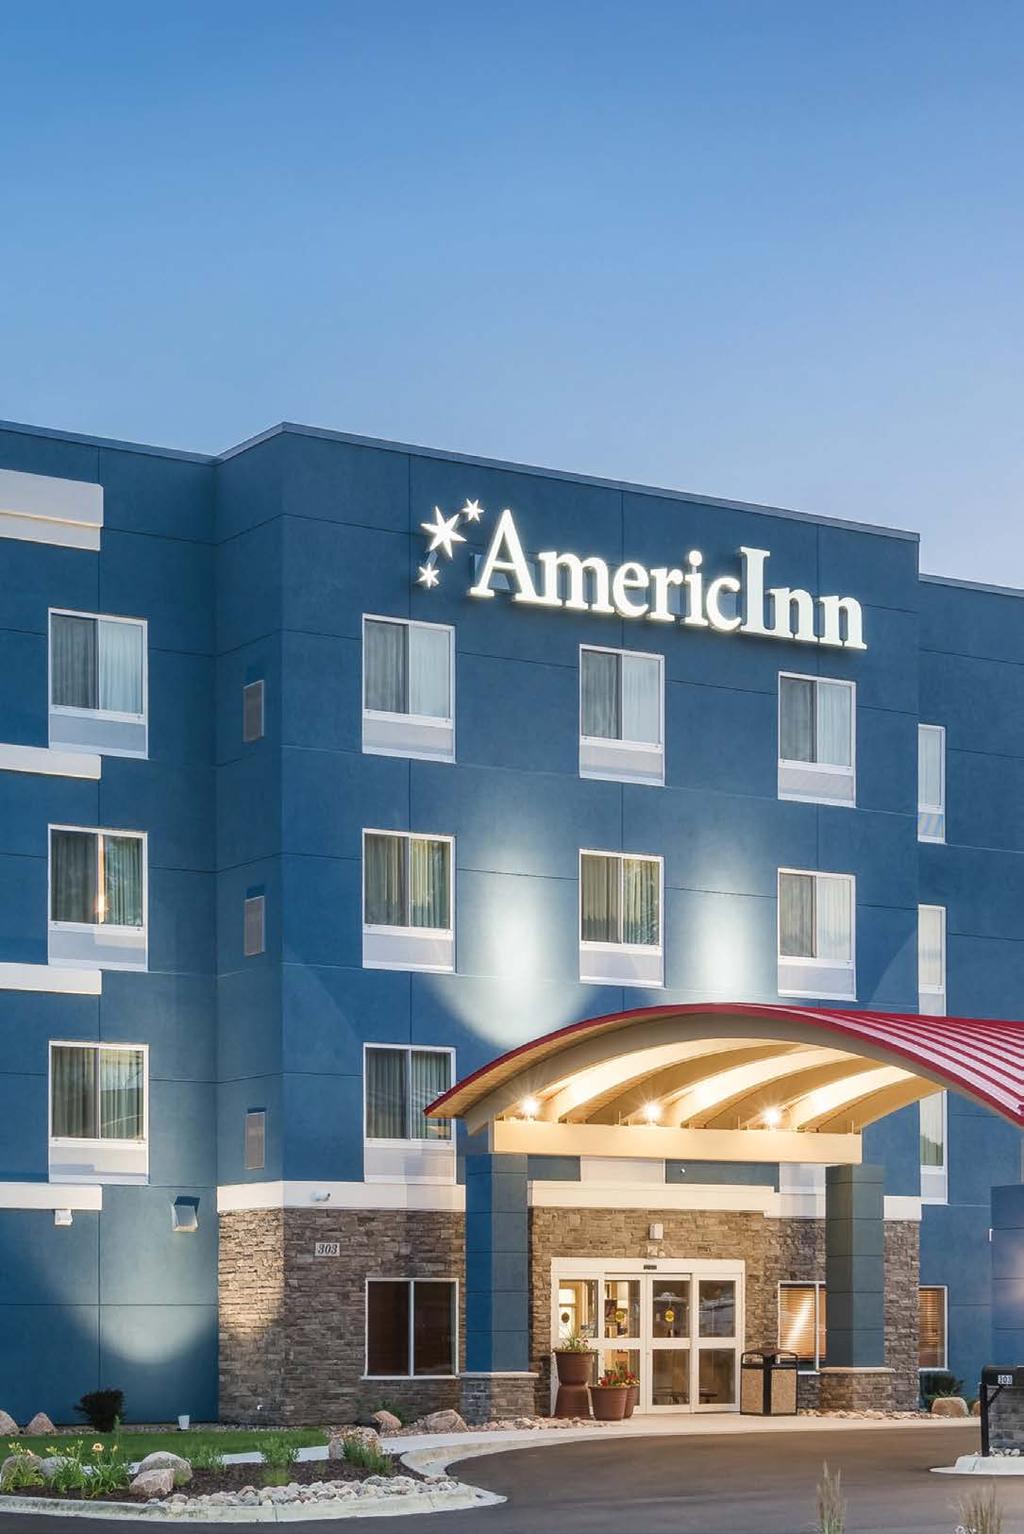 A GROWING OPPORTUNITY FOUNDED IN MINNEAPOLIS-SAINT PAUL IN 1984, AMERICINN IS A SMALL TOWN BRAND, BACKED BY THE SCALE OF WYNDHAM.